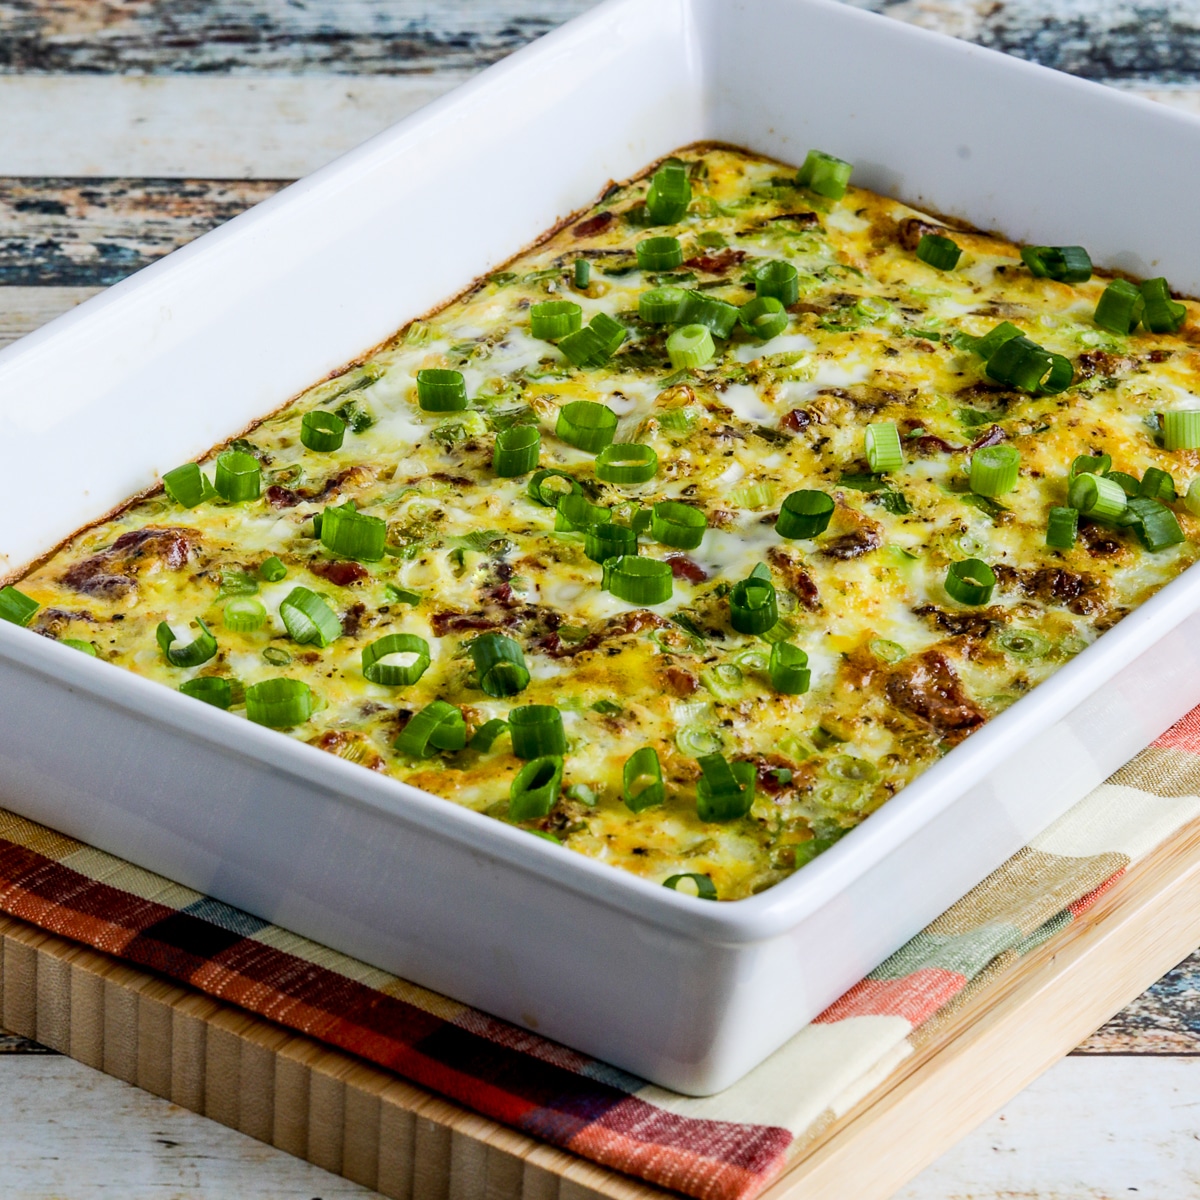 Square image of breakfast dish with feta bacon in a baking dish